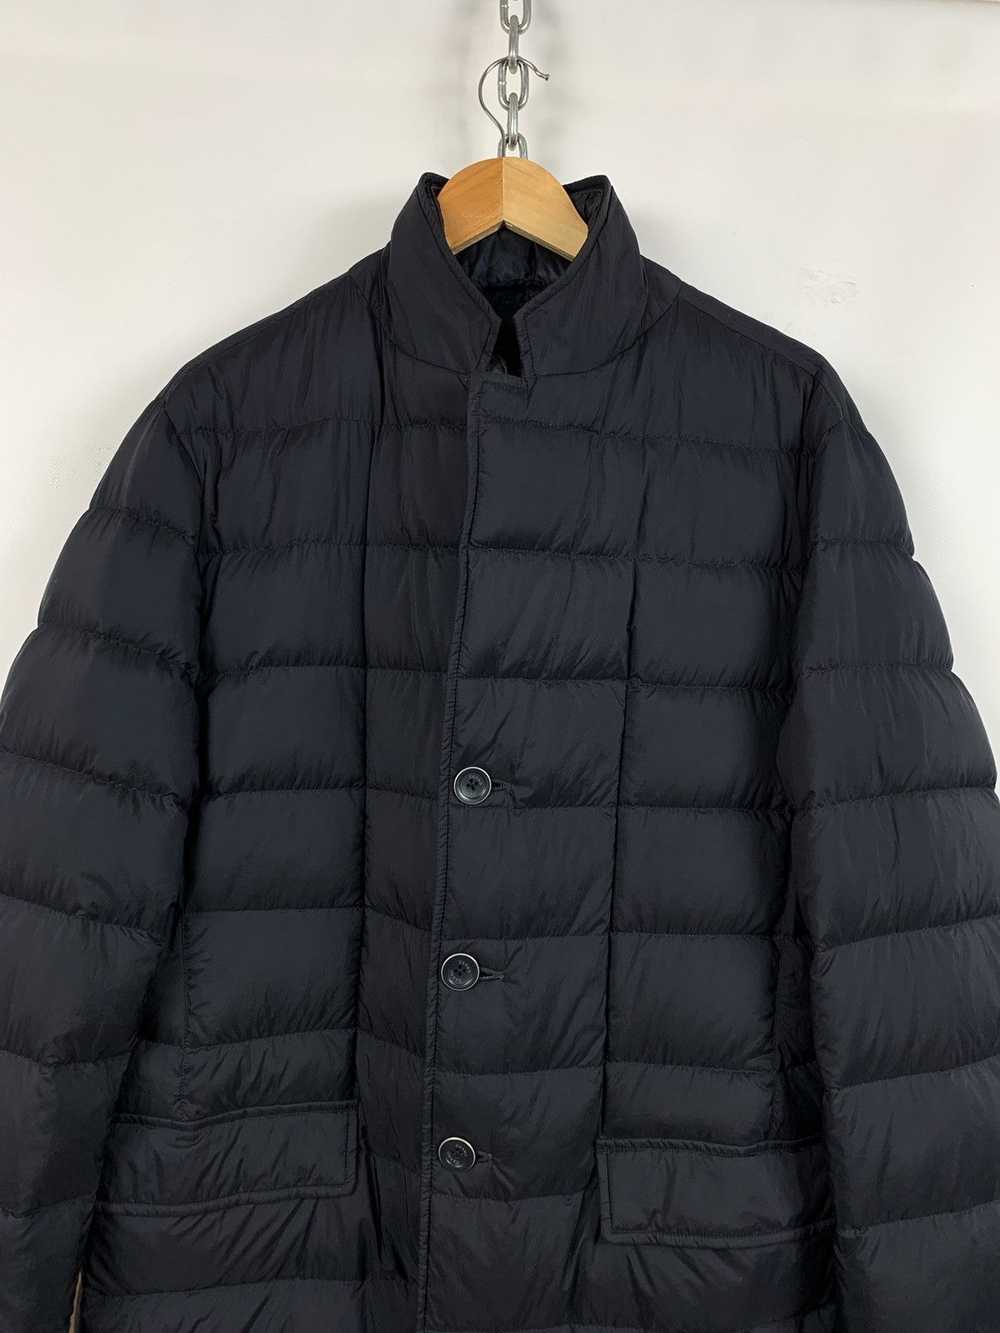 Herno Herno Navy Blue Quilted Down Jacket - image 6